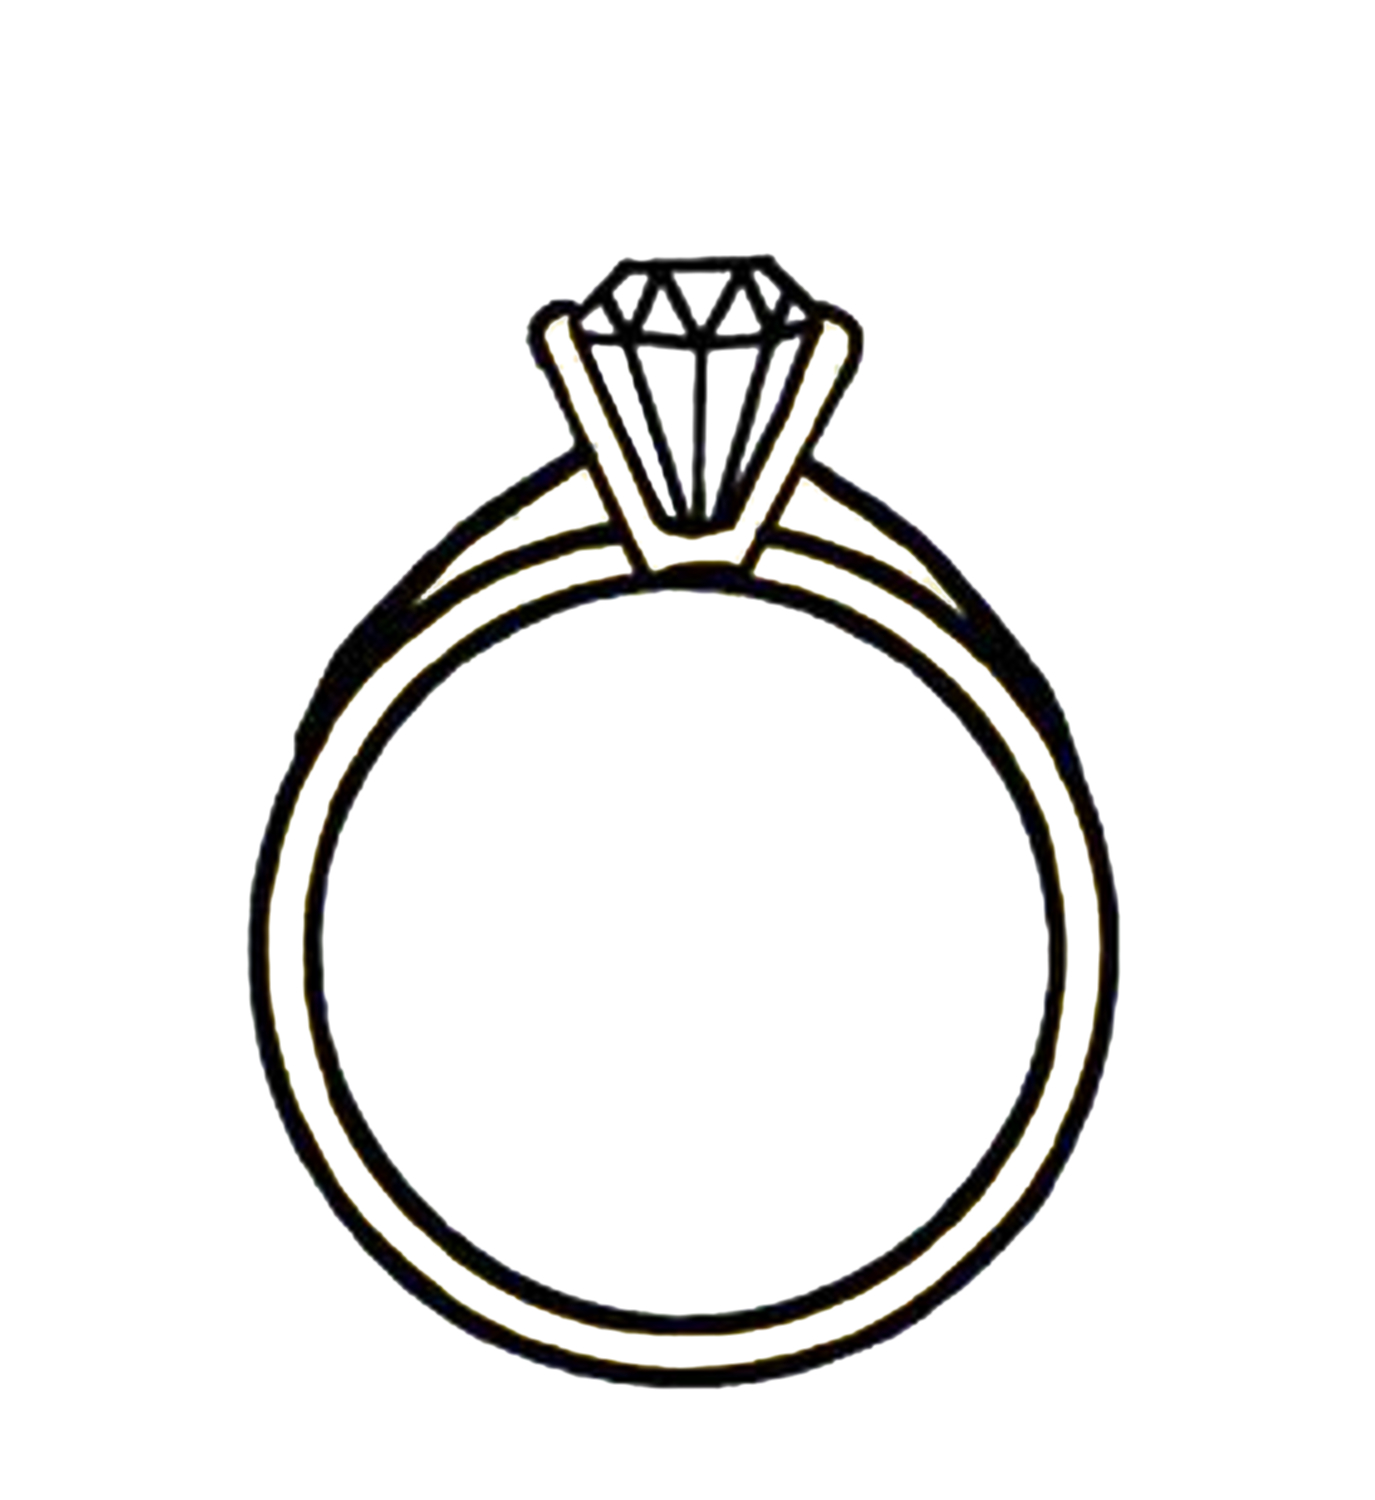 Diamond ring clip art free clipart images